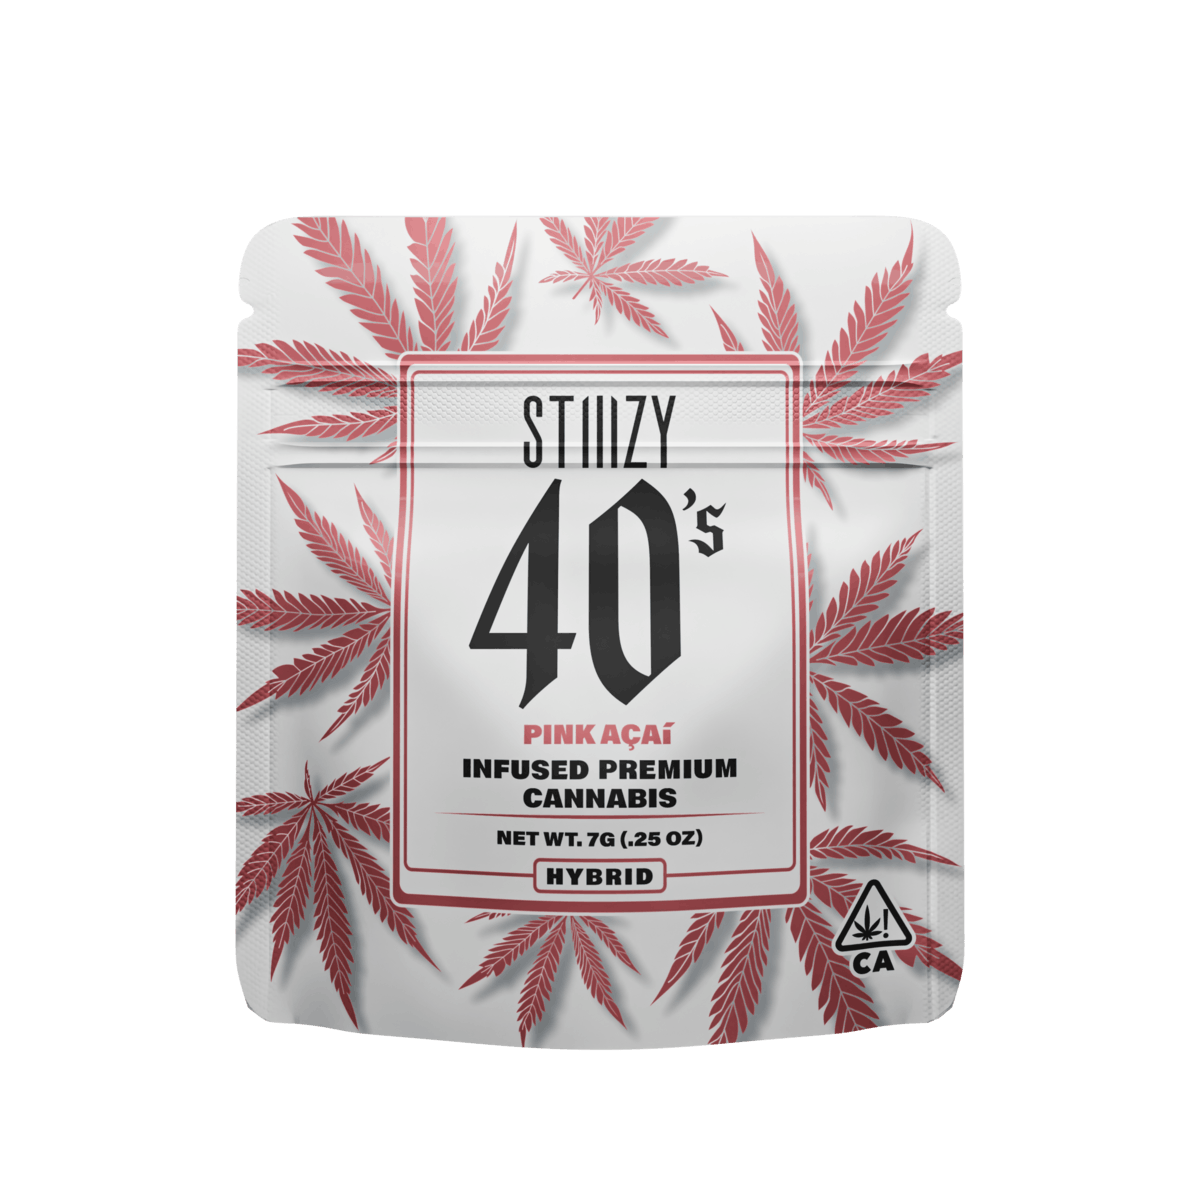 STIIIZY Infused 40s Flower - 7G Blue Dream